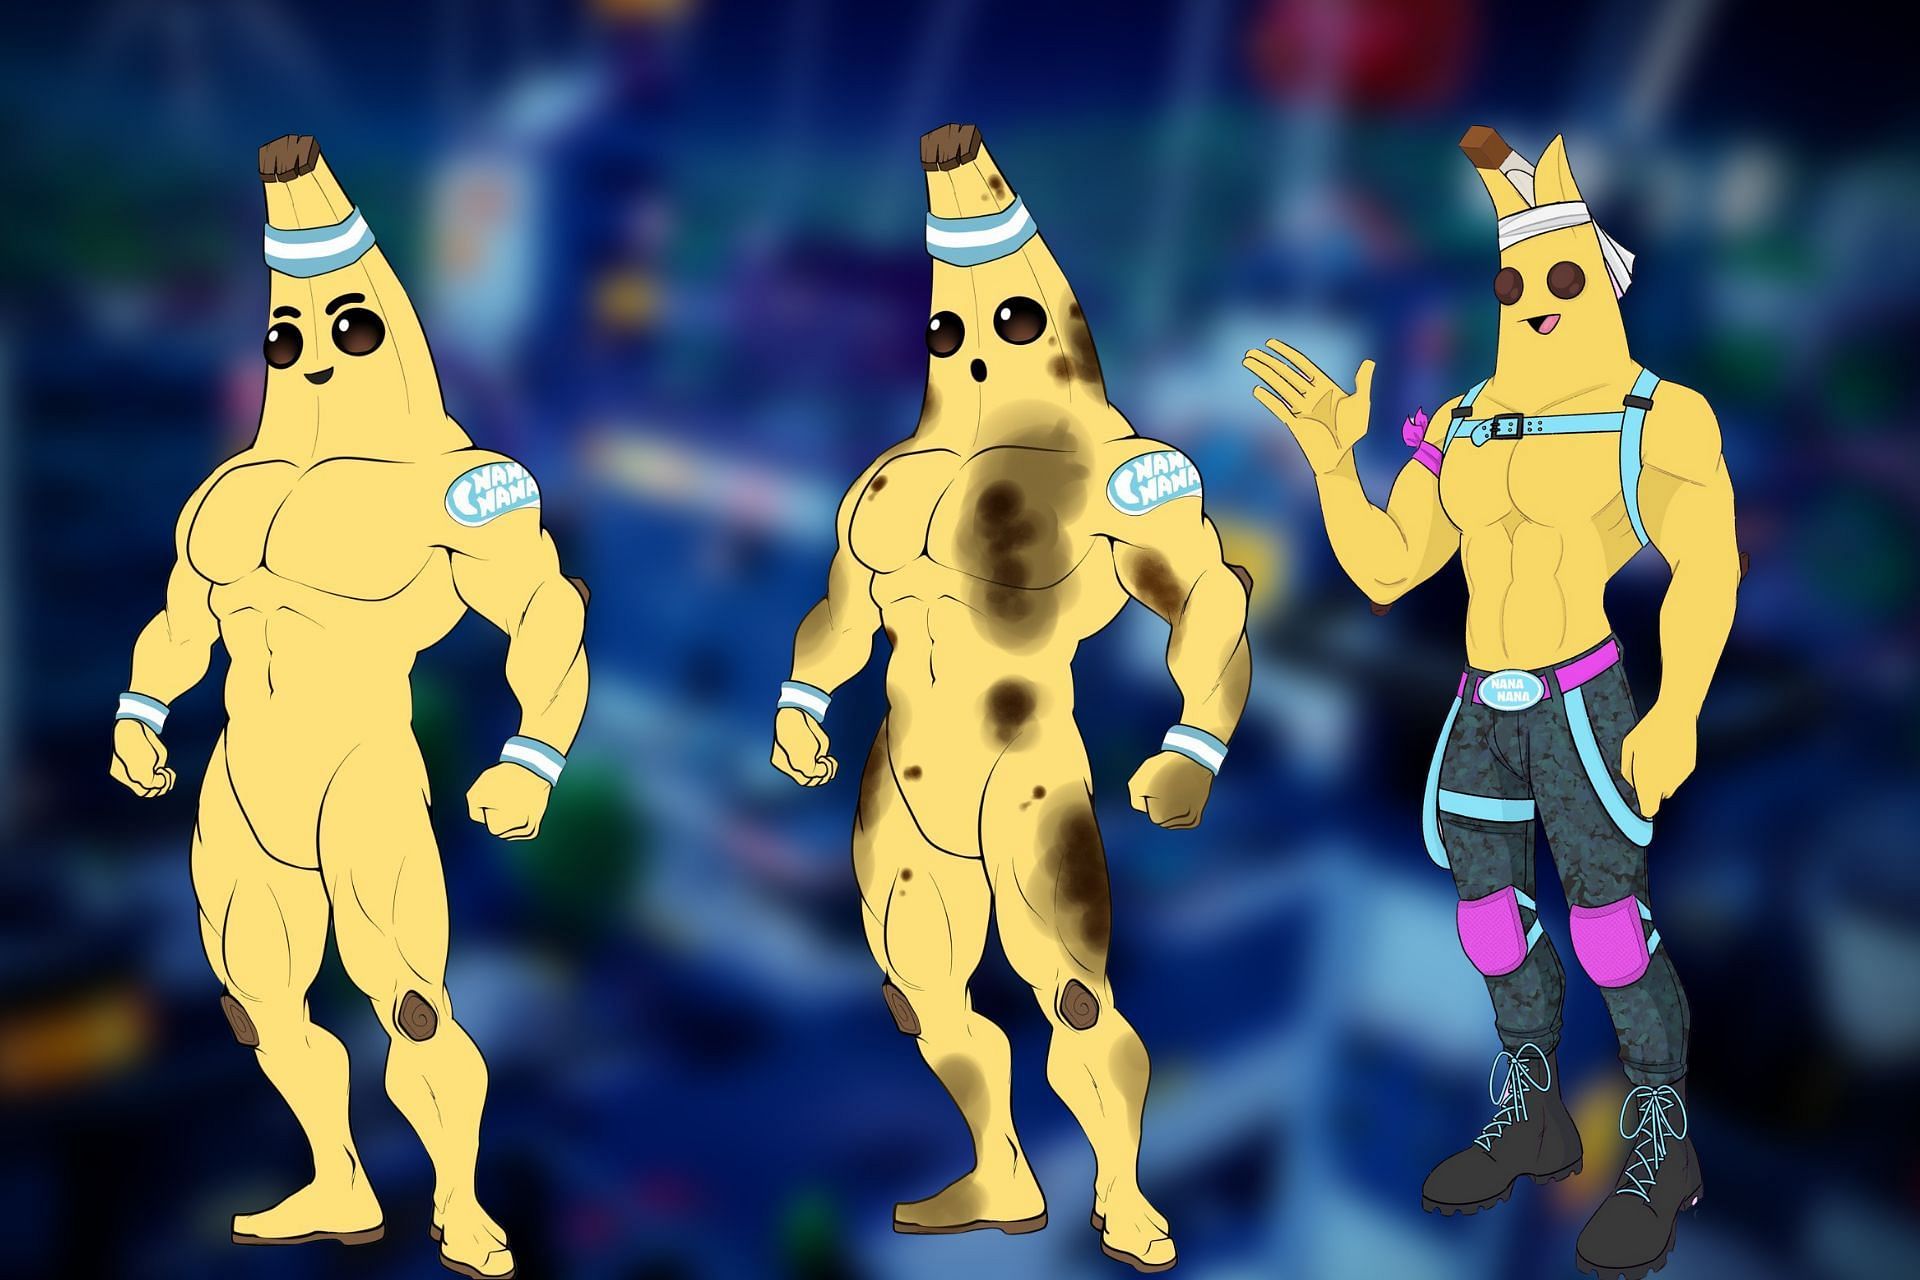 Fortnite Peely concept reimagines the game's favorite banana on steroi...